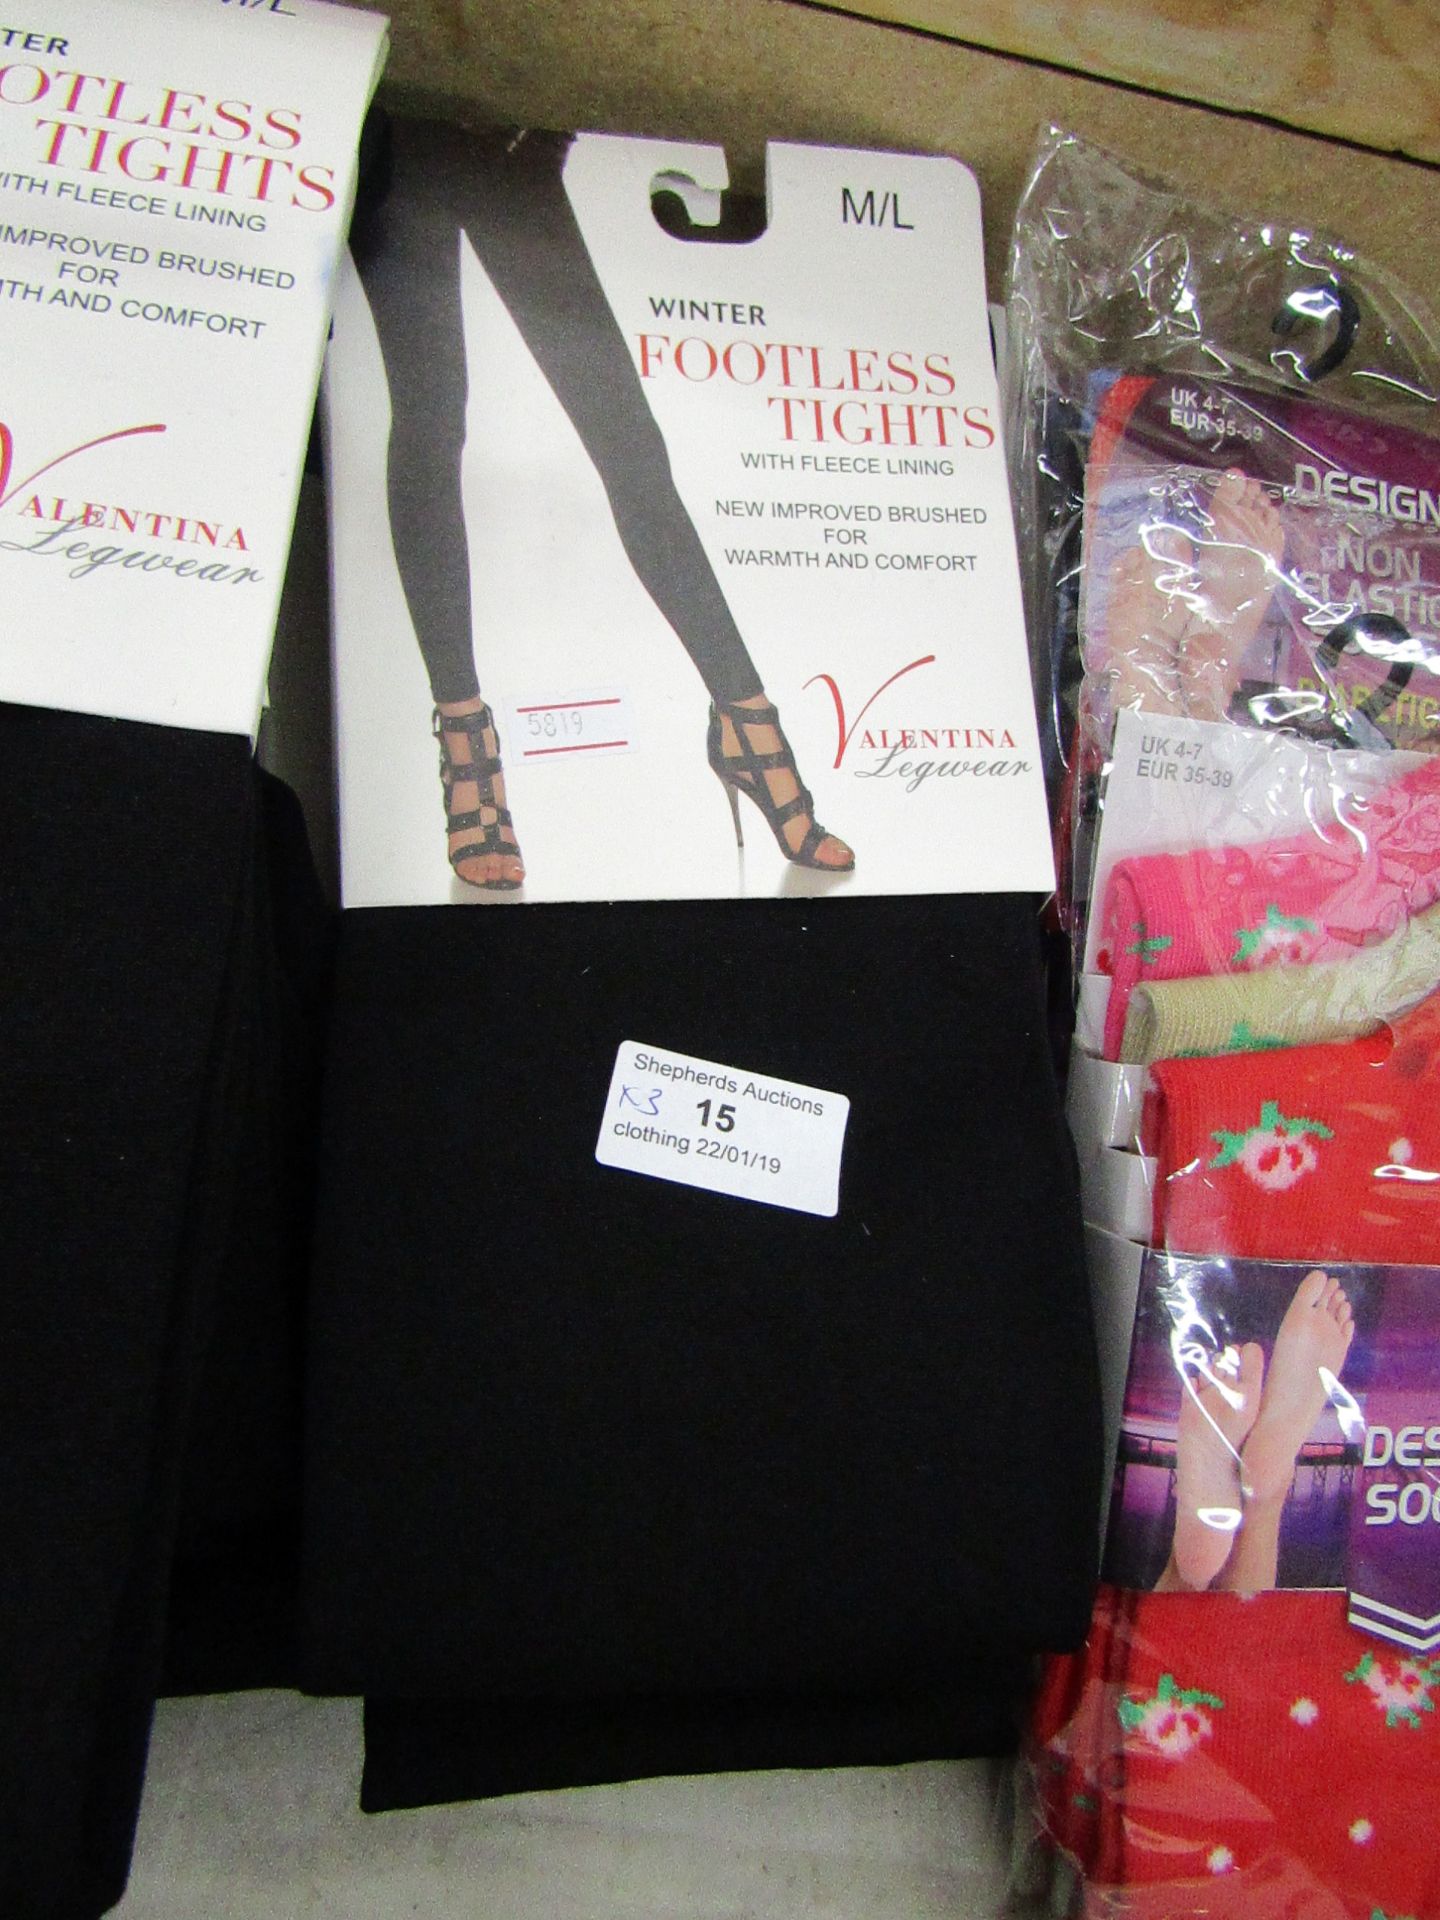 Alentina legwear medium/large winter footless tights with fleece lining , new and packaged.